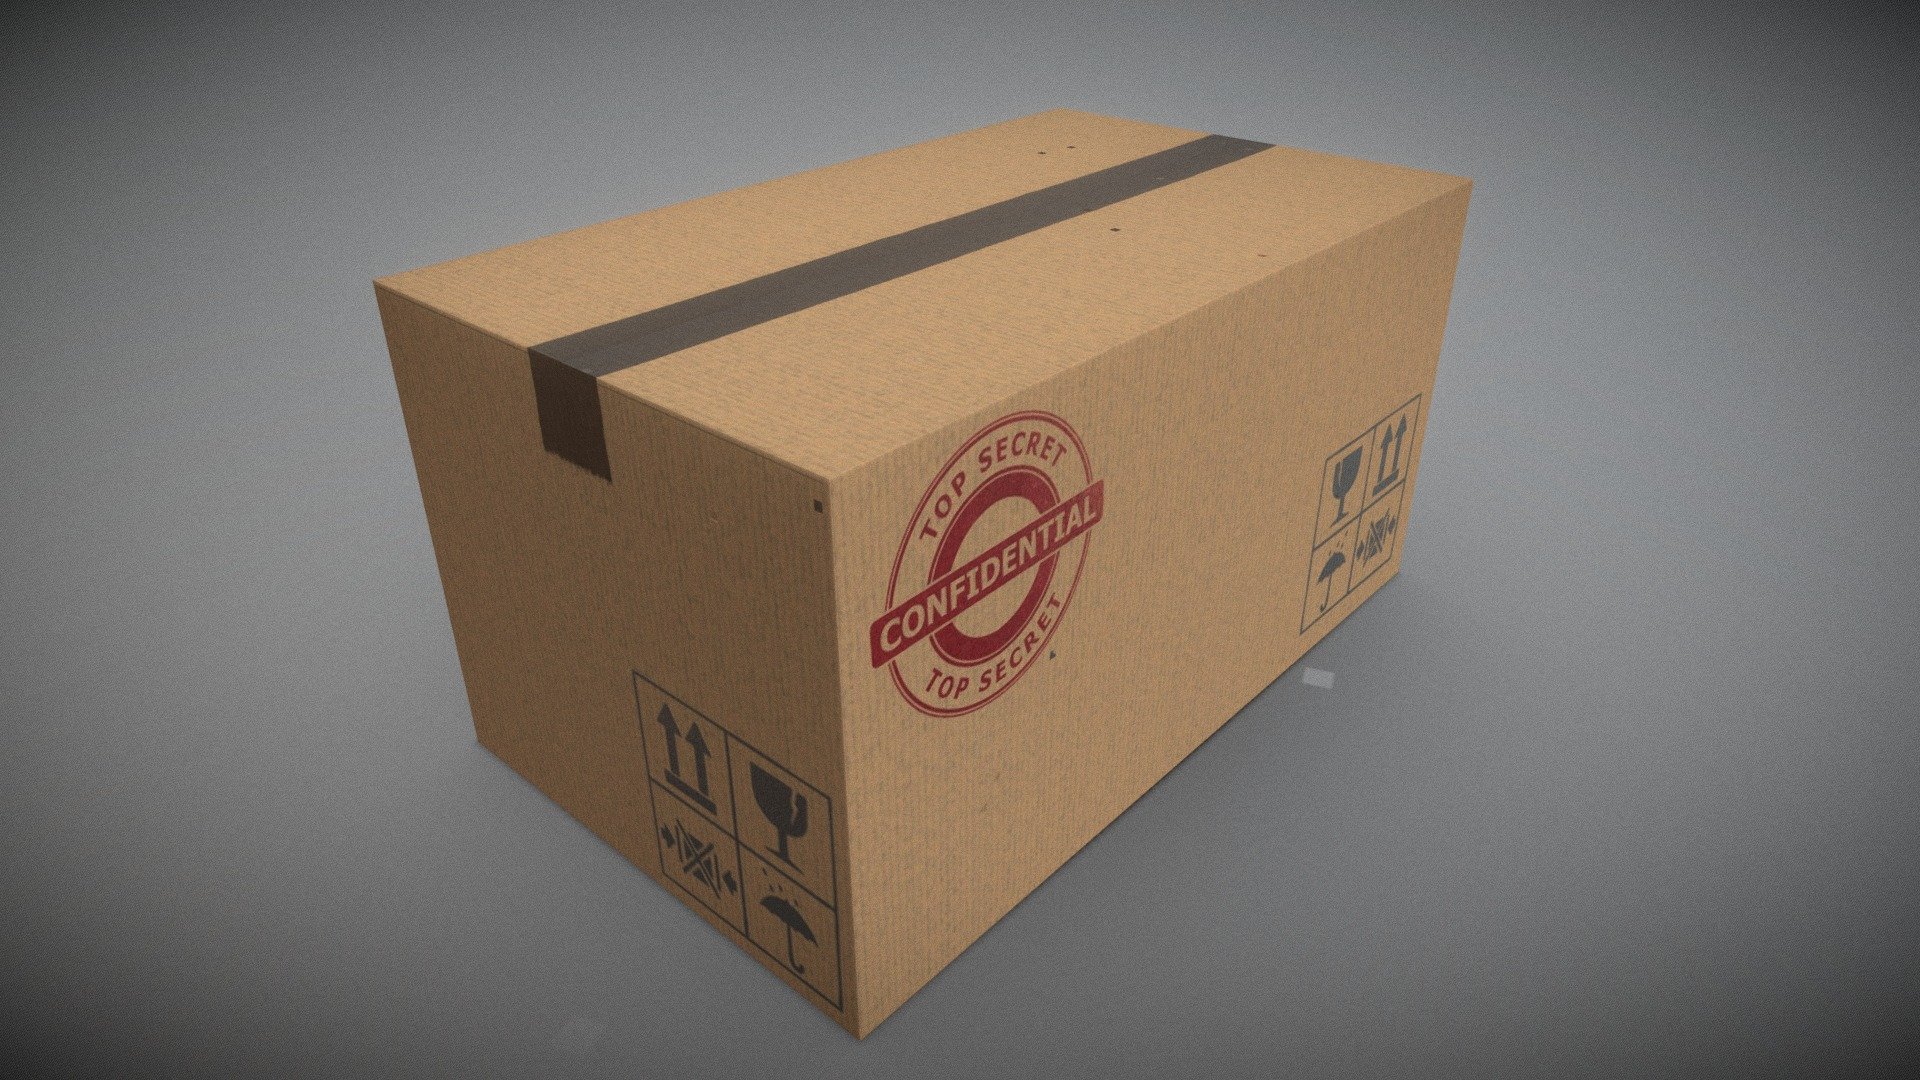 Hello everyone, its my first normaly finished model of a box. 

It has textures 2048/2048.

Game ready model for Unreal Engine 4 or Unity 3d model